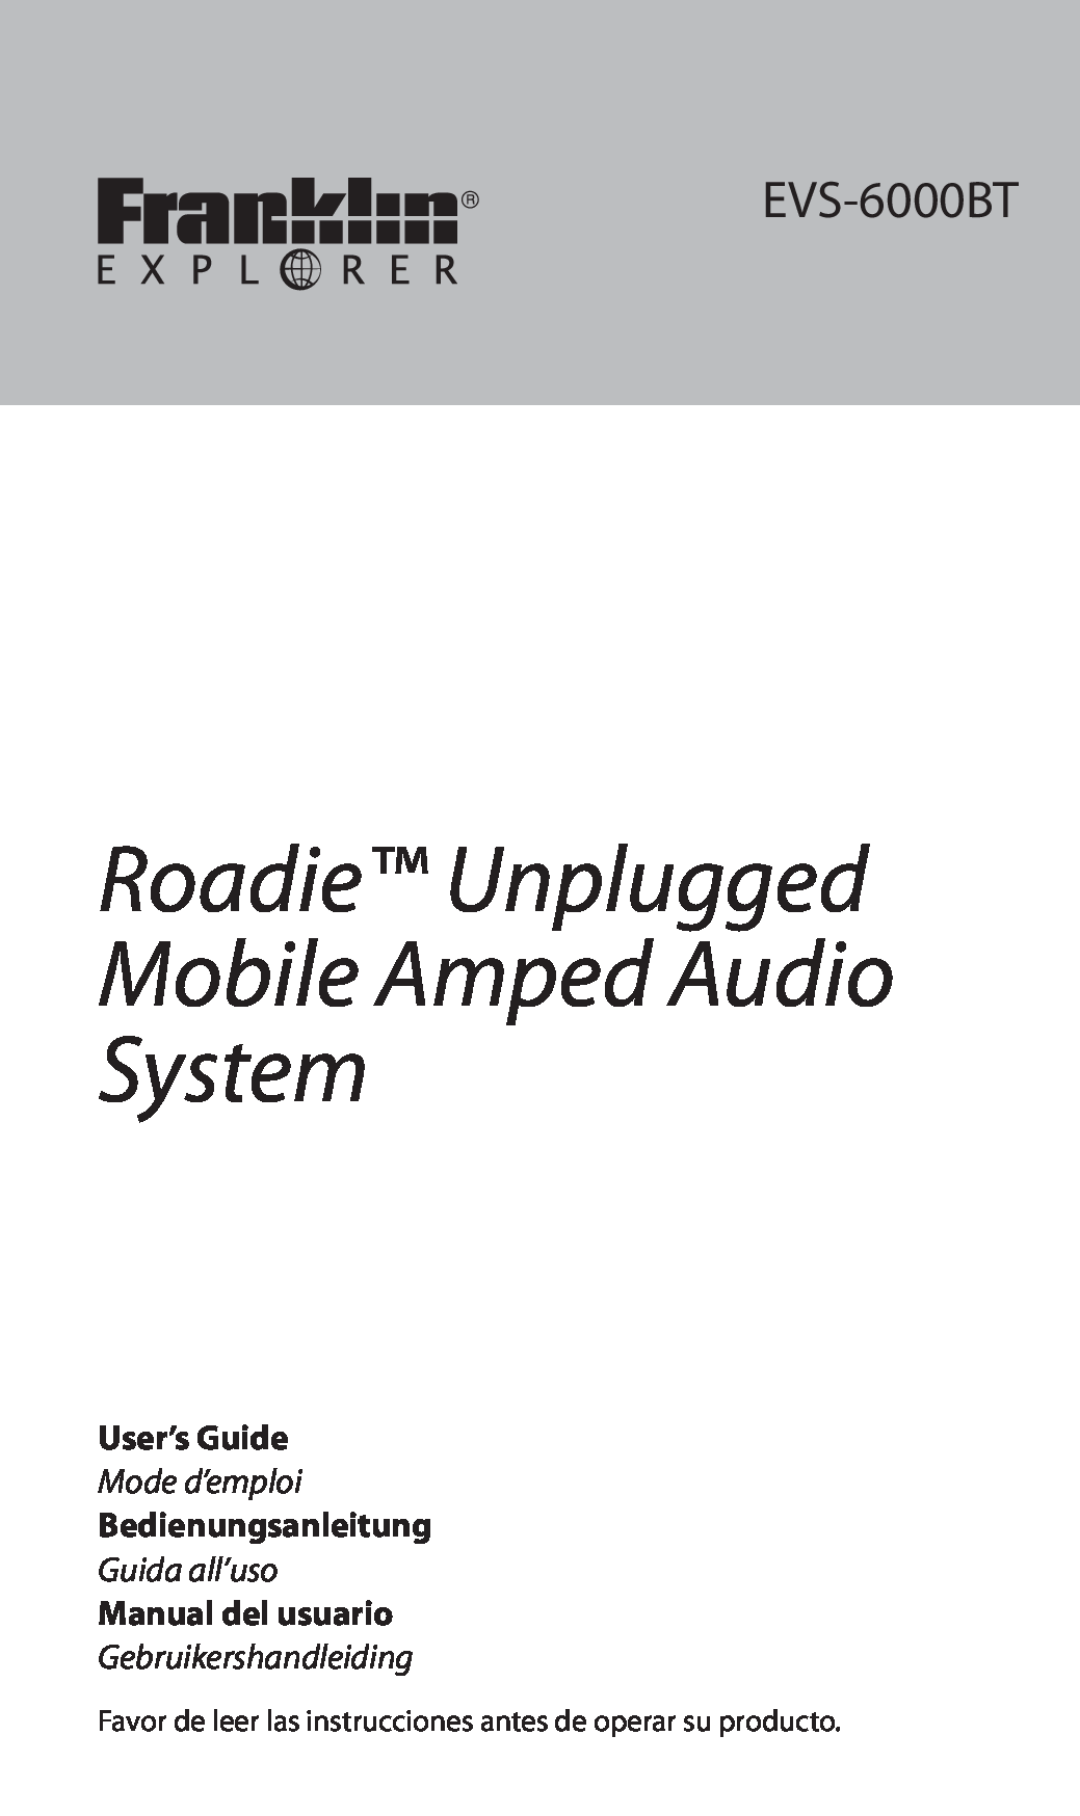 Franklin roadie unplugged mobile amped audio system manual User’s Guide, Mode d’emploi, Bedienungsanleitung, Guida all’uso 